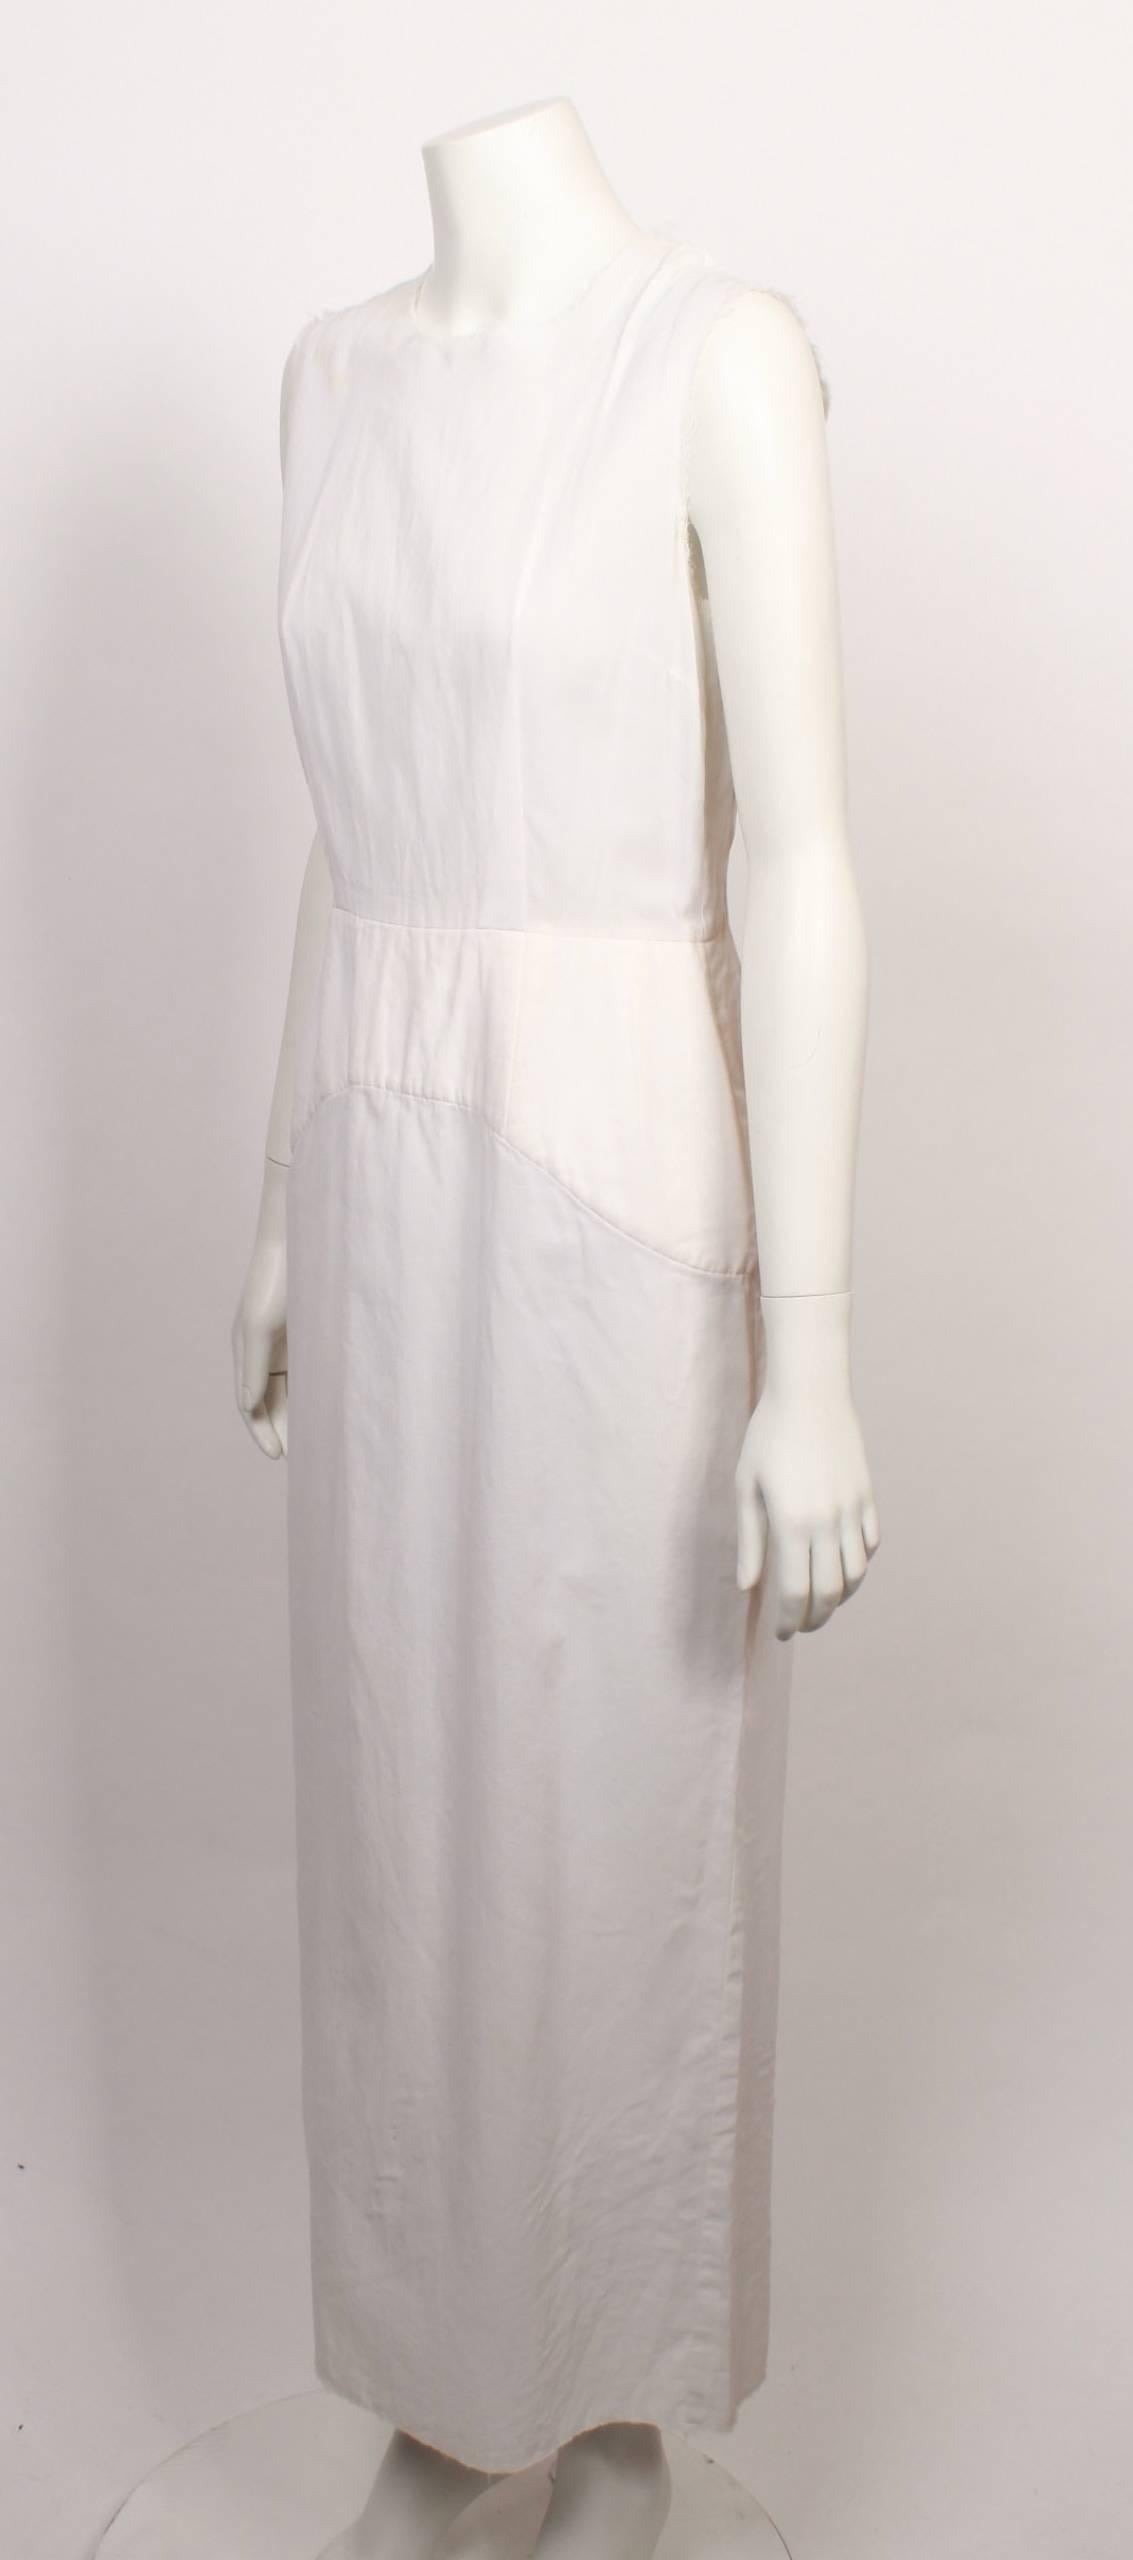 FINAL SALE
Madam Virtue & Co

Classic minimalist  Comme des Garcons  white sleeveless shell dress with yoke feature and raw edges on armhole and neckline. Care and size label missing. Measurements like a medium.
Made in Japan. 